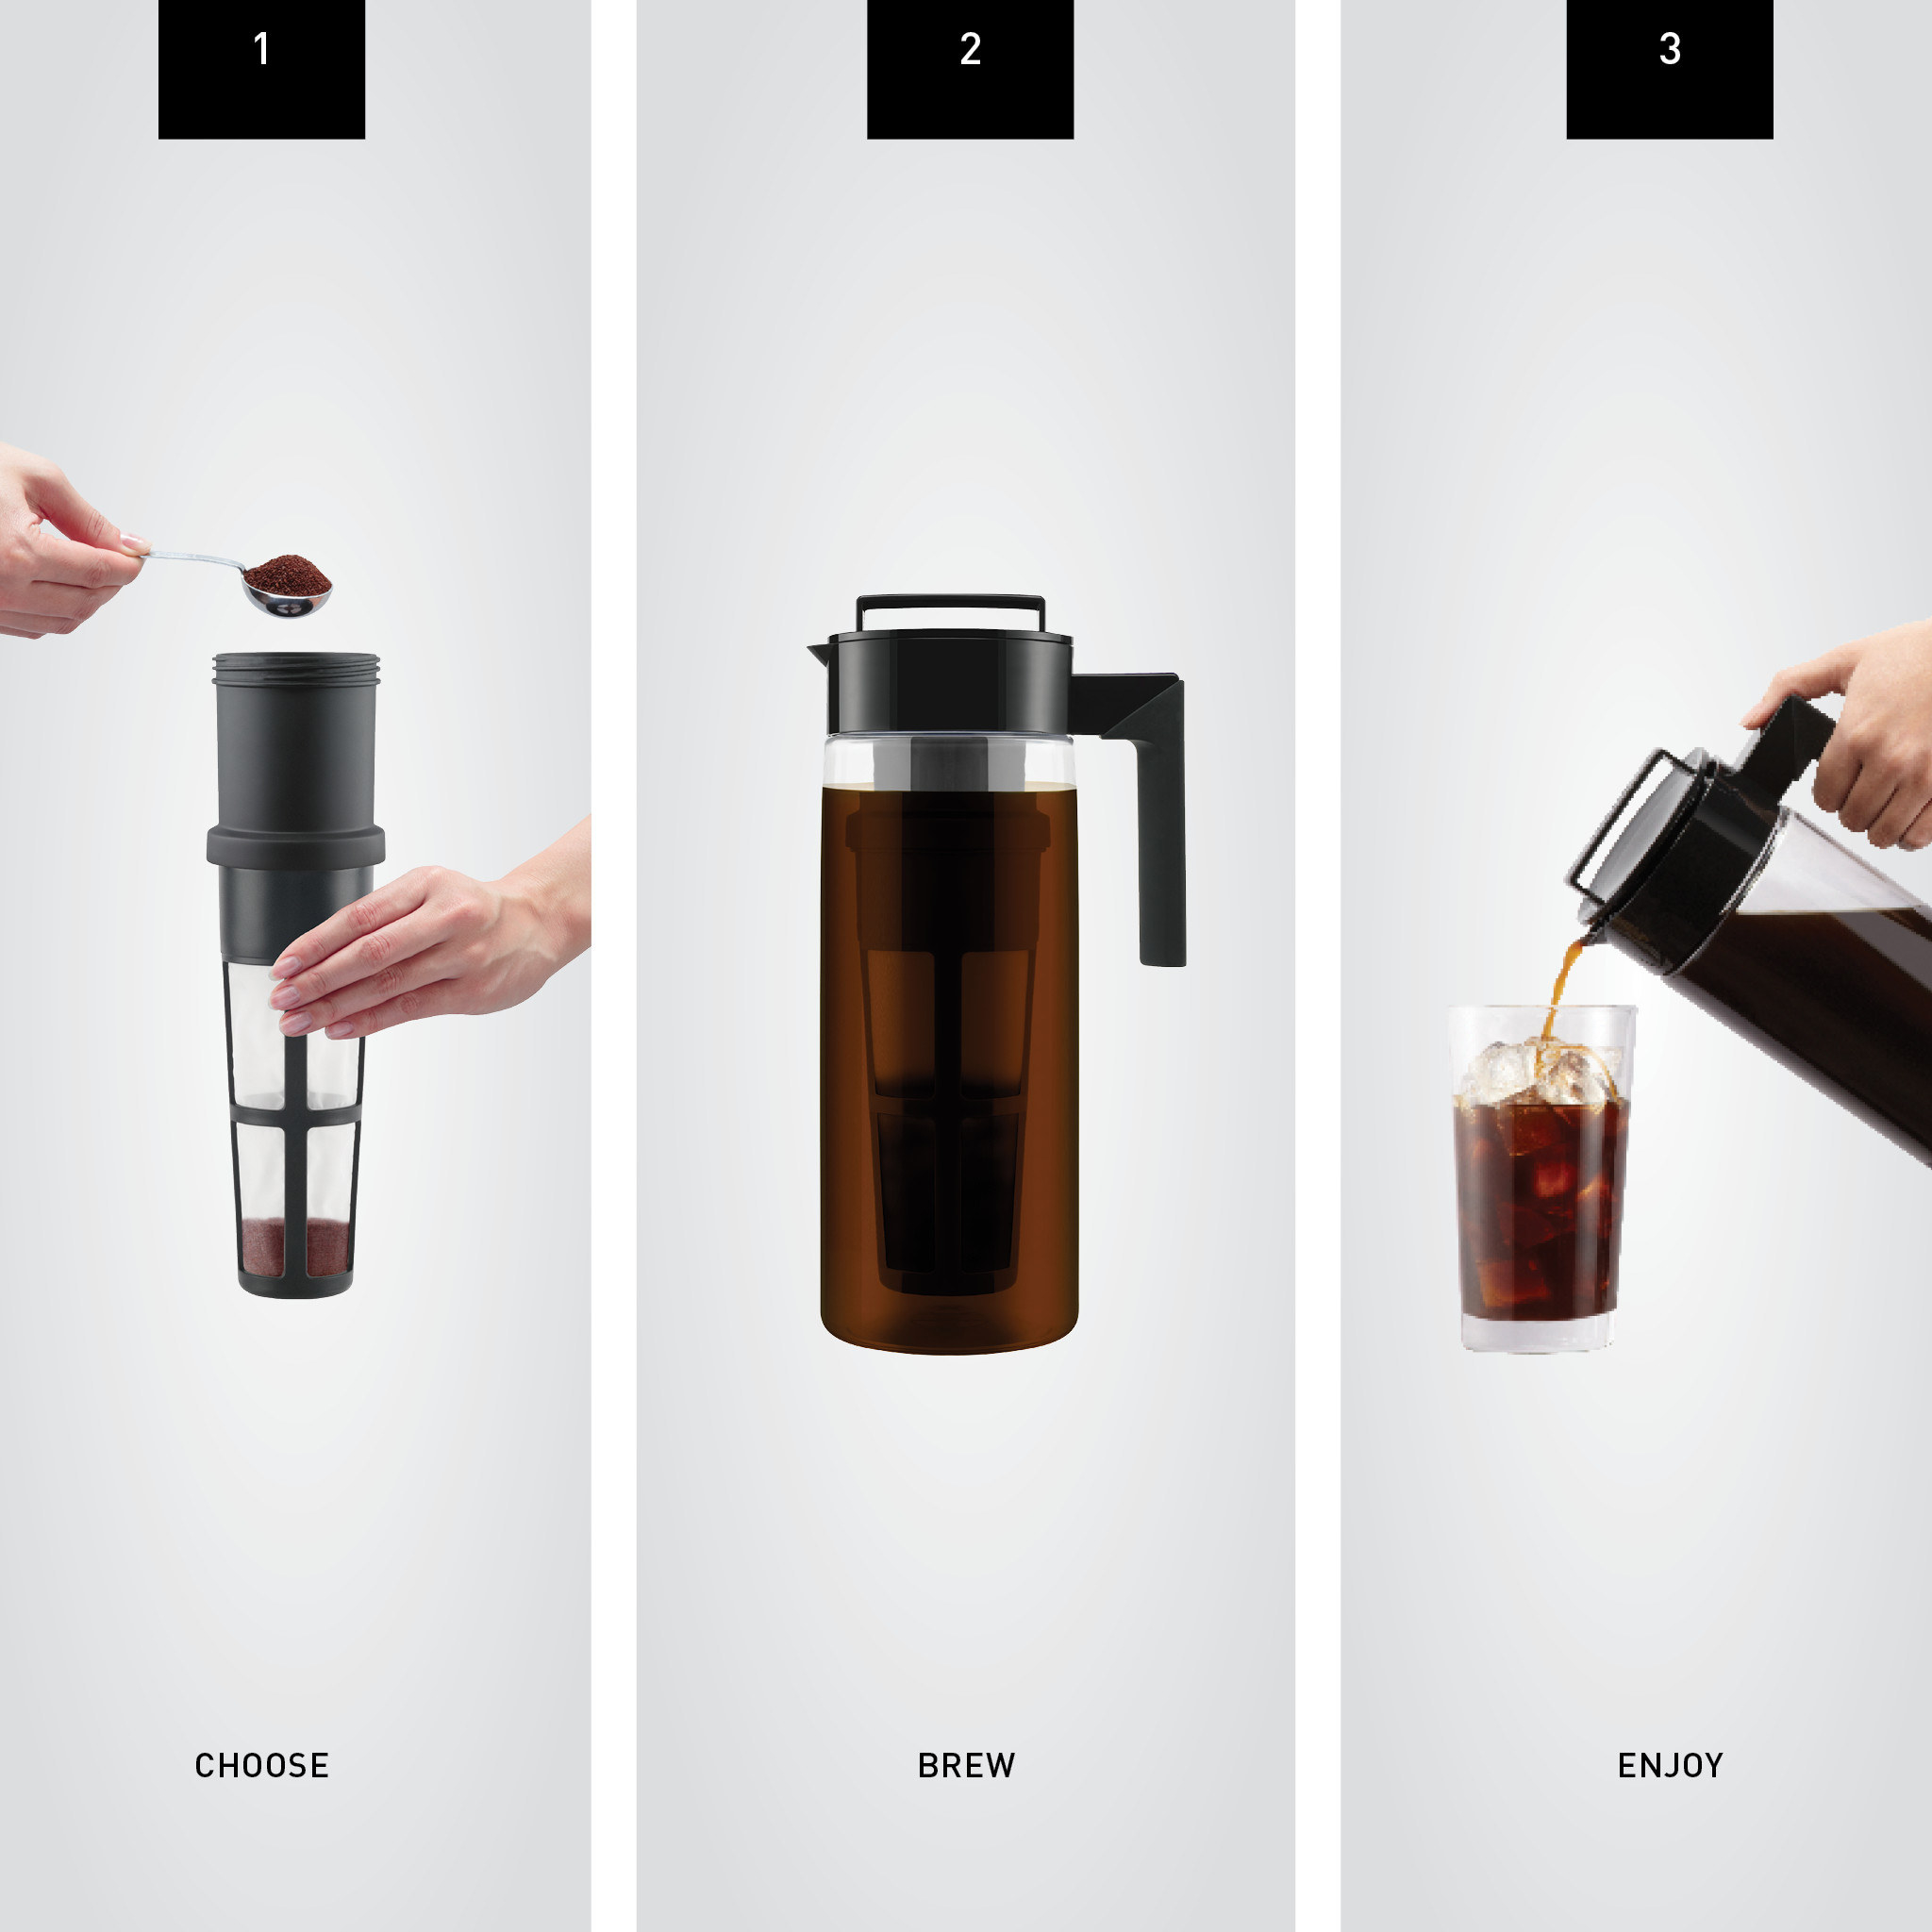 Three different depictions of the parts of the coffee maker